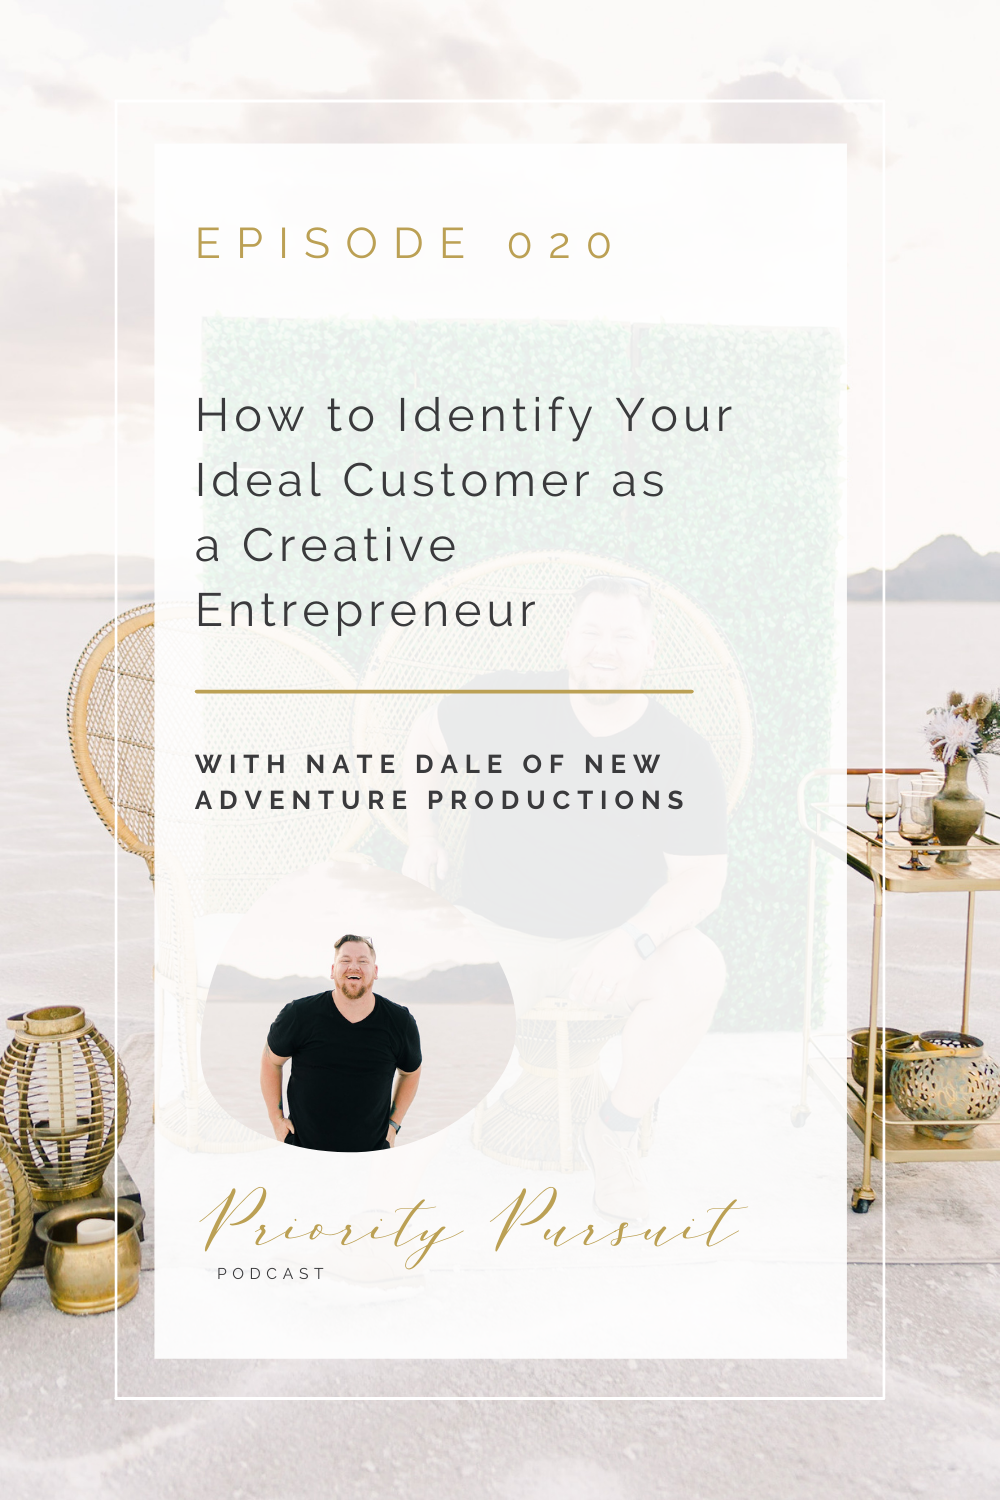 Victoria Rayburn and Nate Dale explain how to identify your ideal customer as a creative entrepreneur in this episode of “Priority Pursuit.”